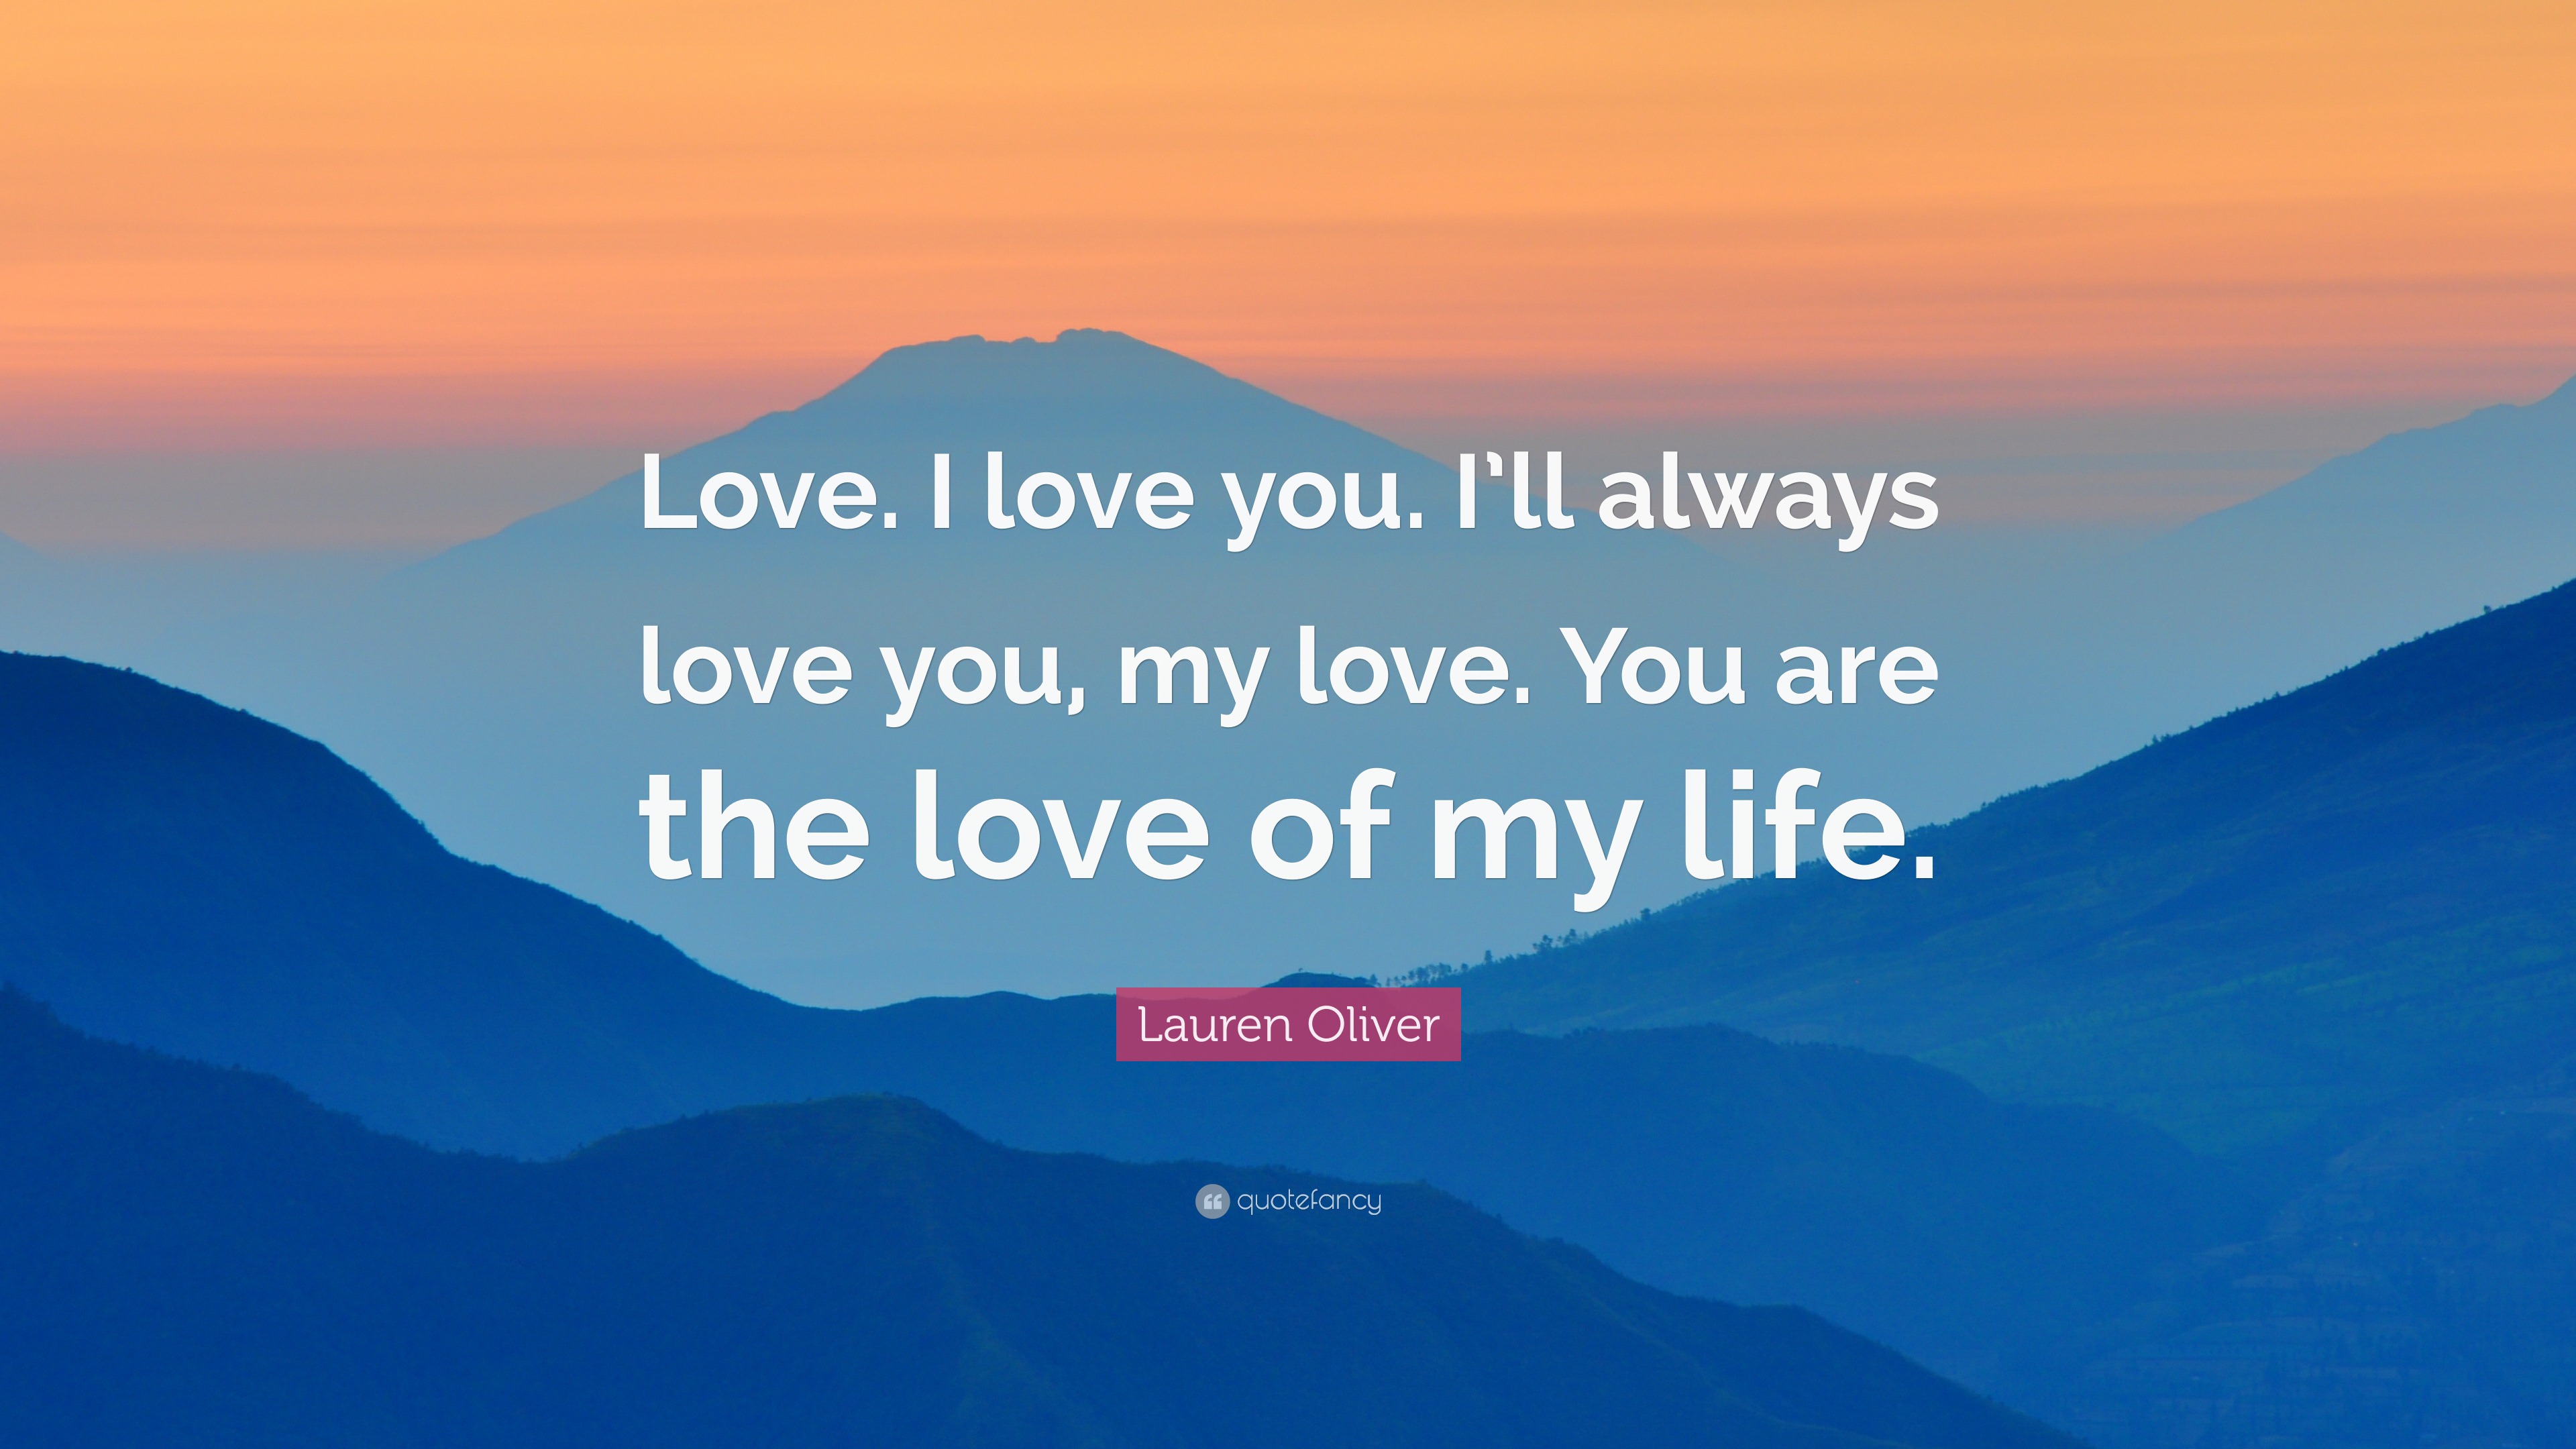 Lauren Oliver Quote: “Love. I love you. I’ll always love you, my love ...